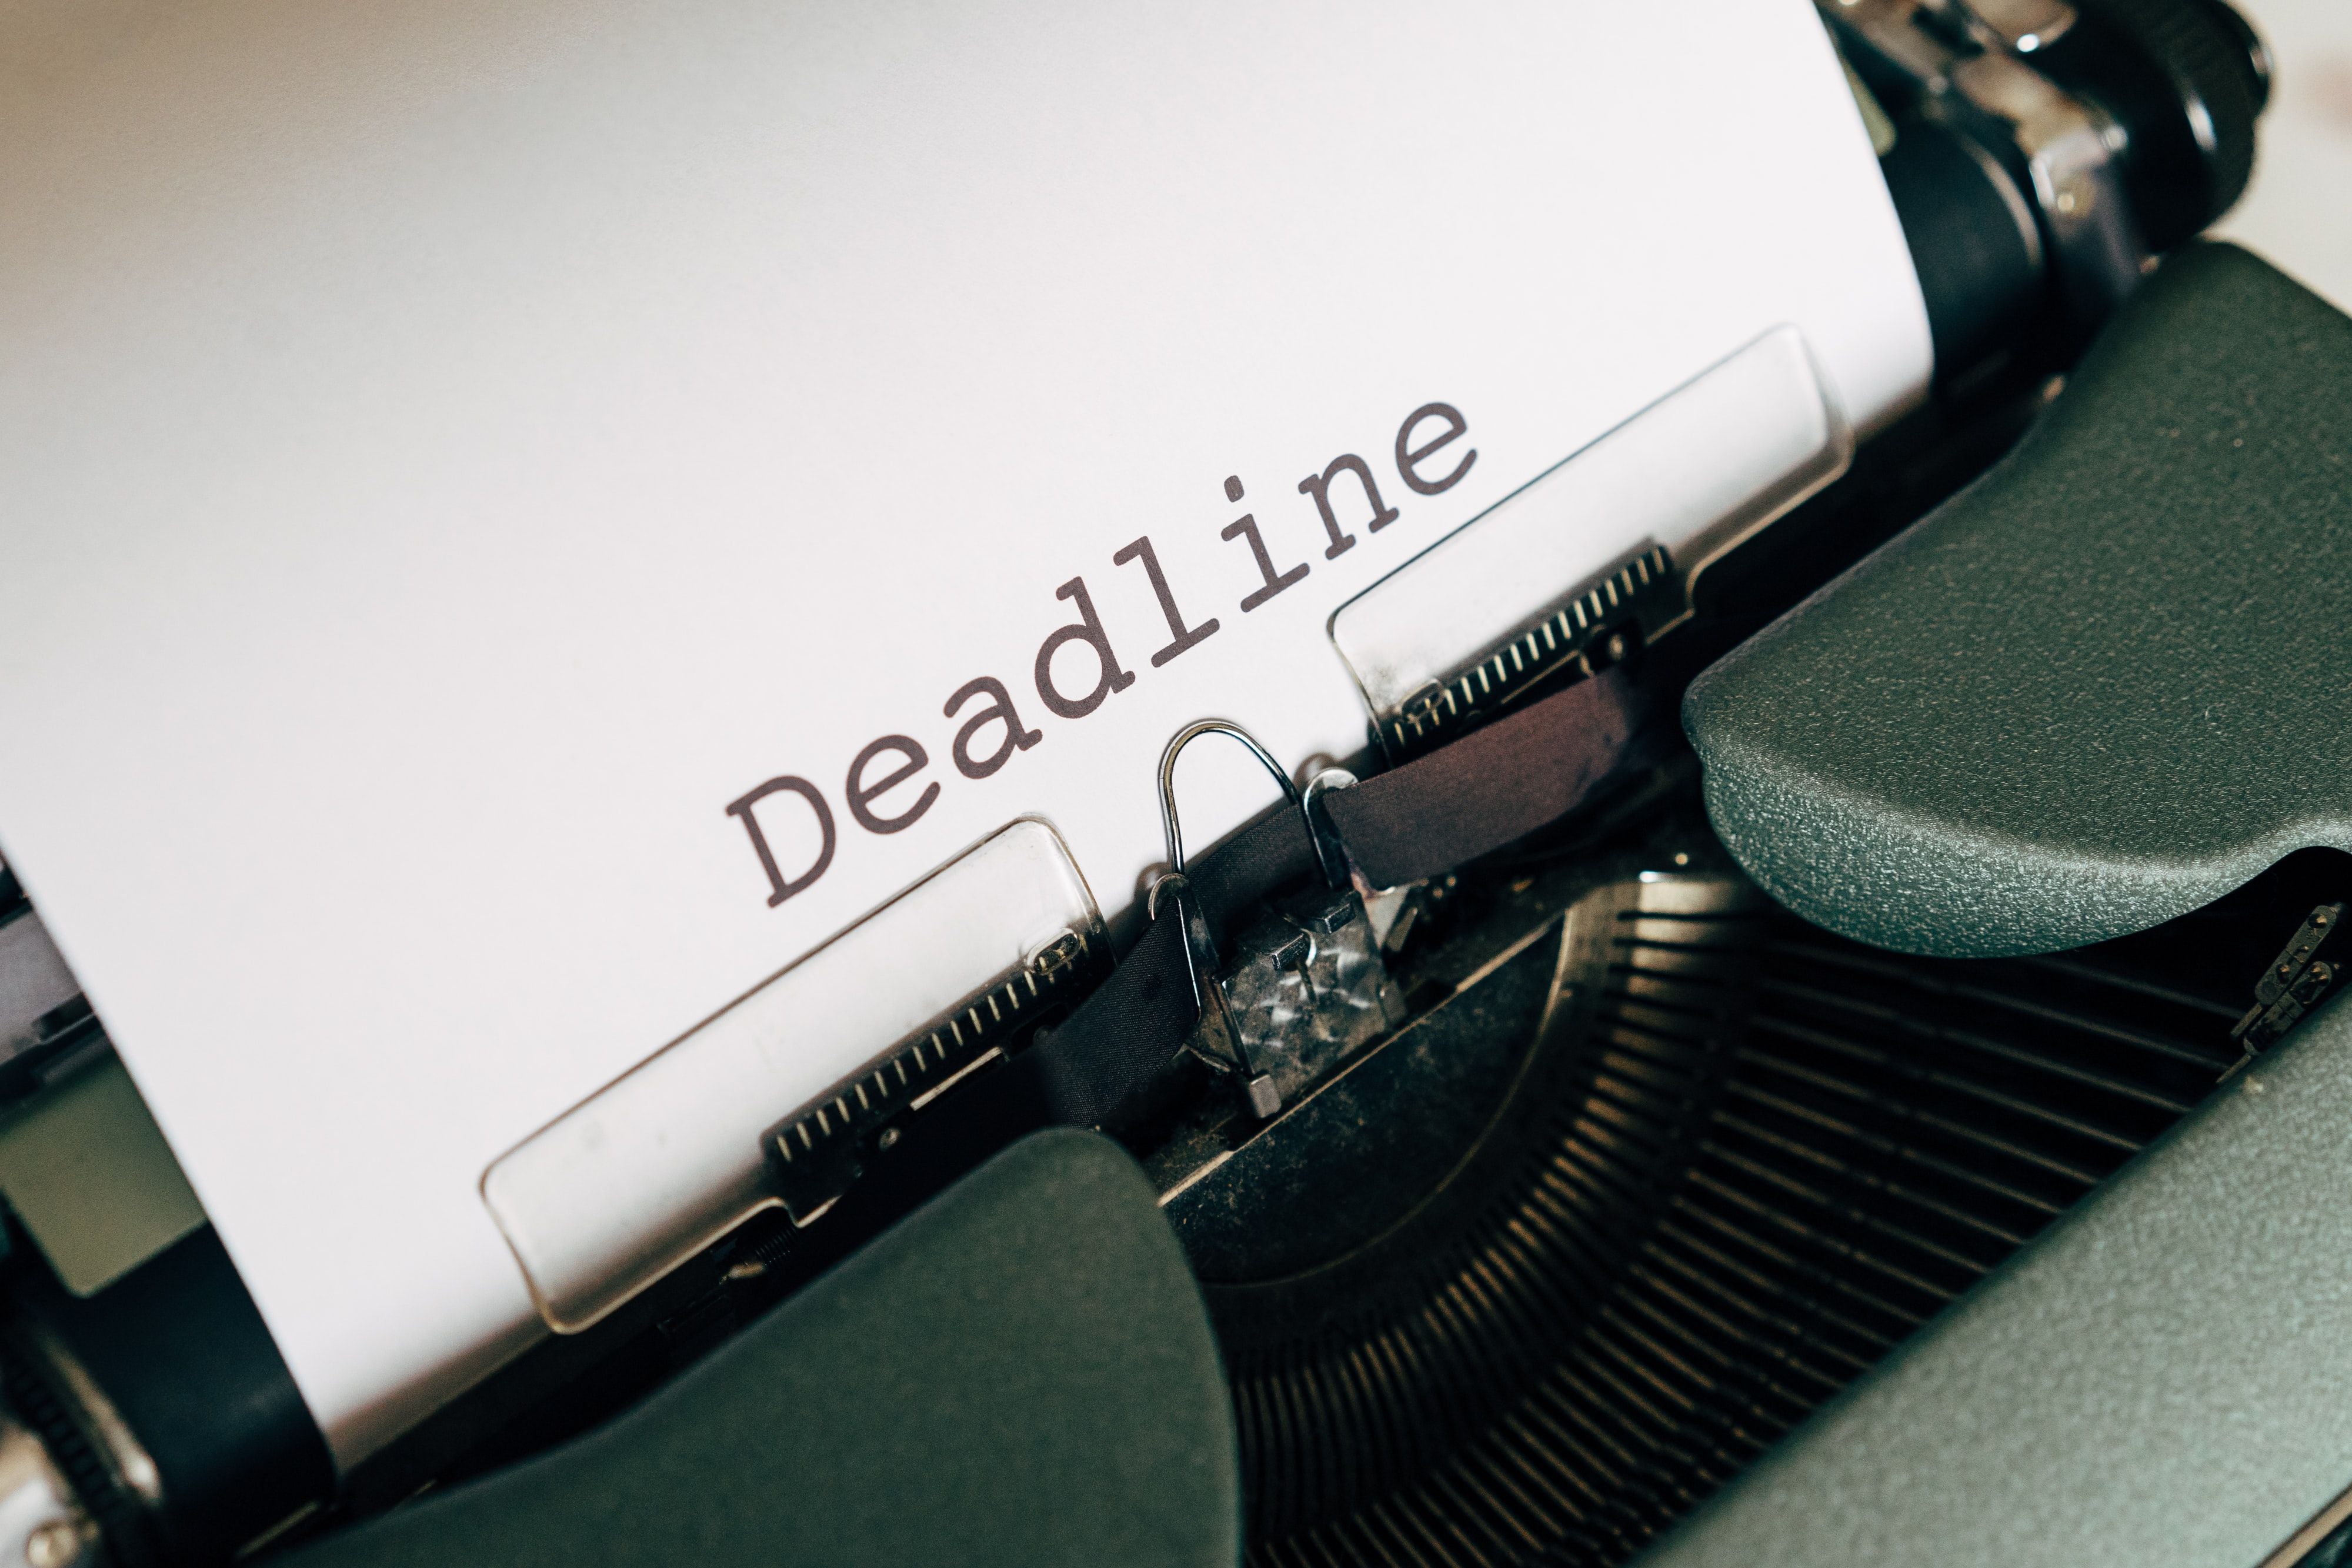 A typewriter with the word “deadline” in the header.